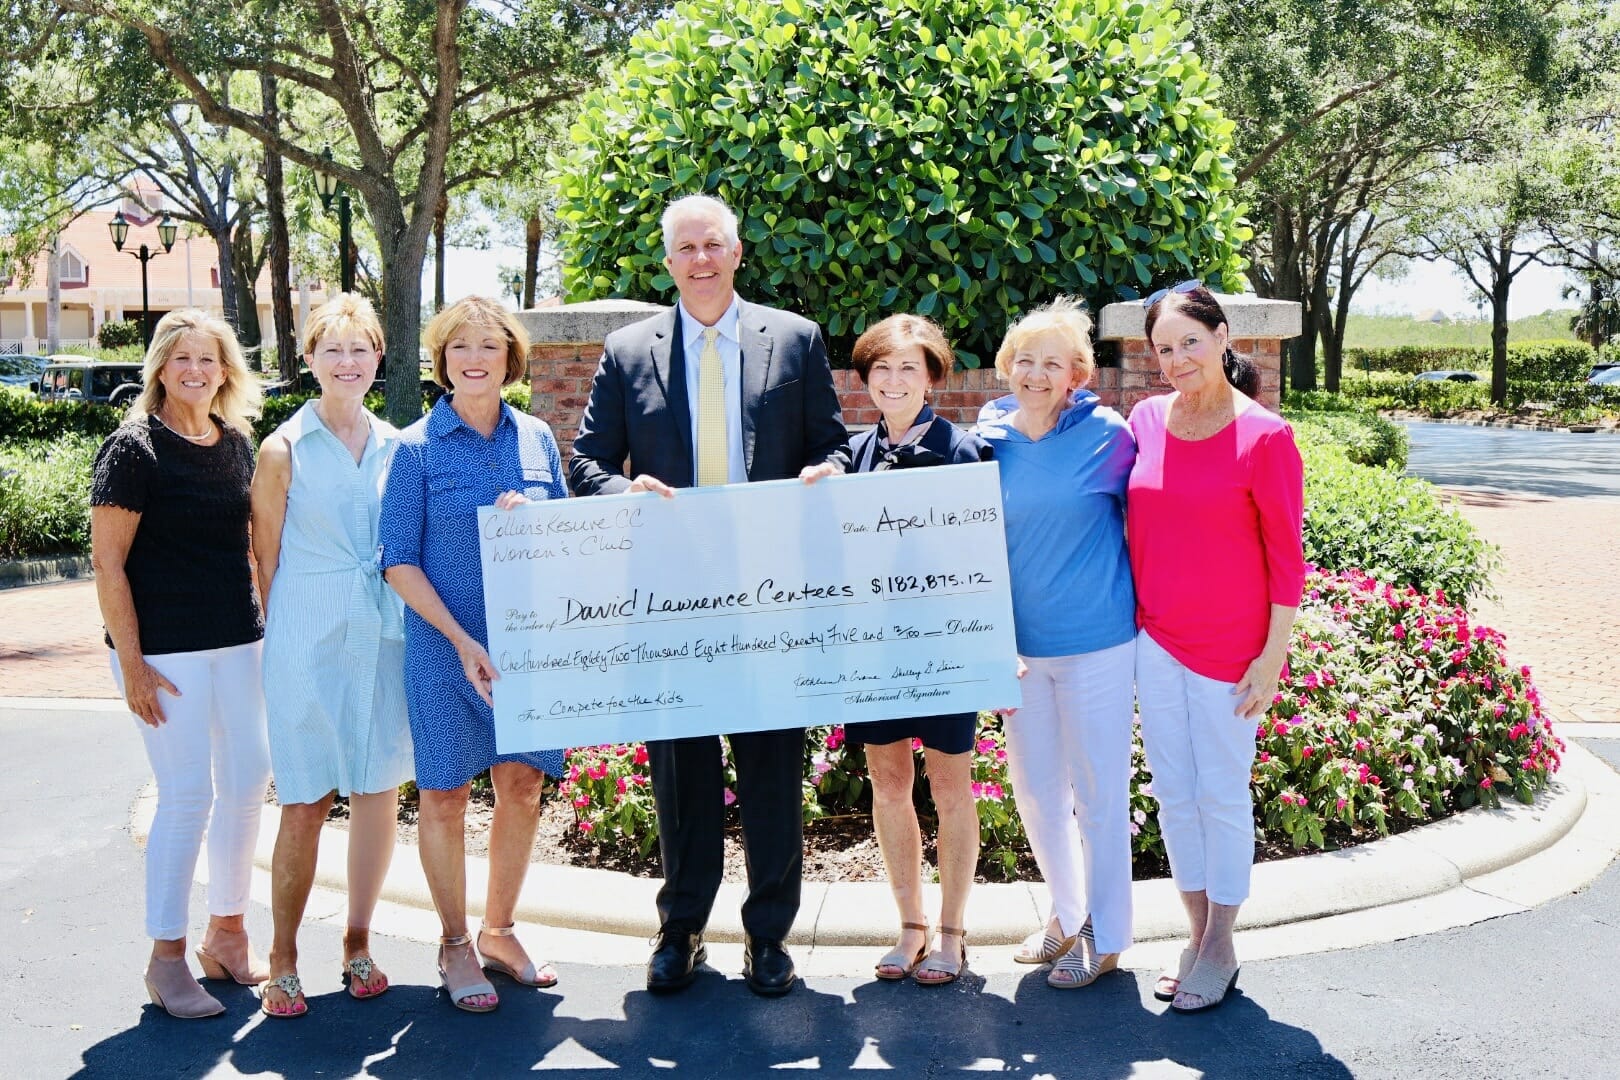 image 1 Collier’s Reserve Country Club Women’s Club Raises $183,000 to Expand Children’s Crisis Services at David Lawrence Centers